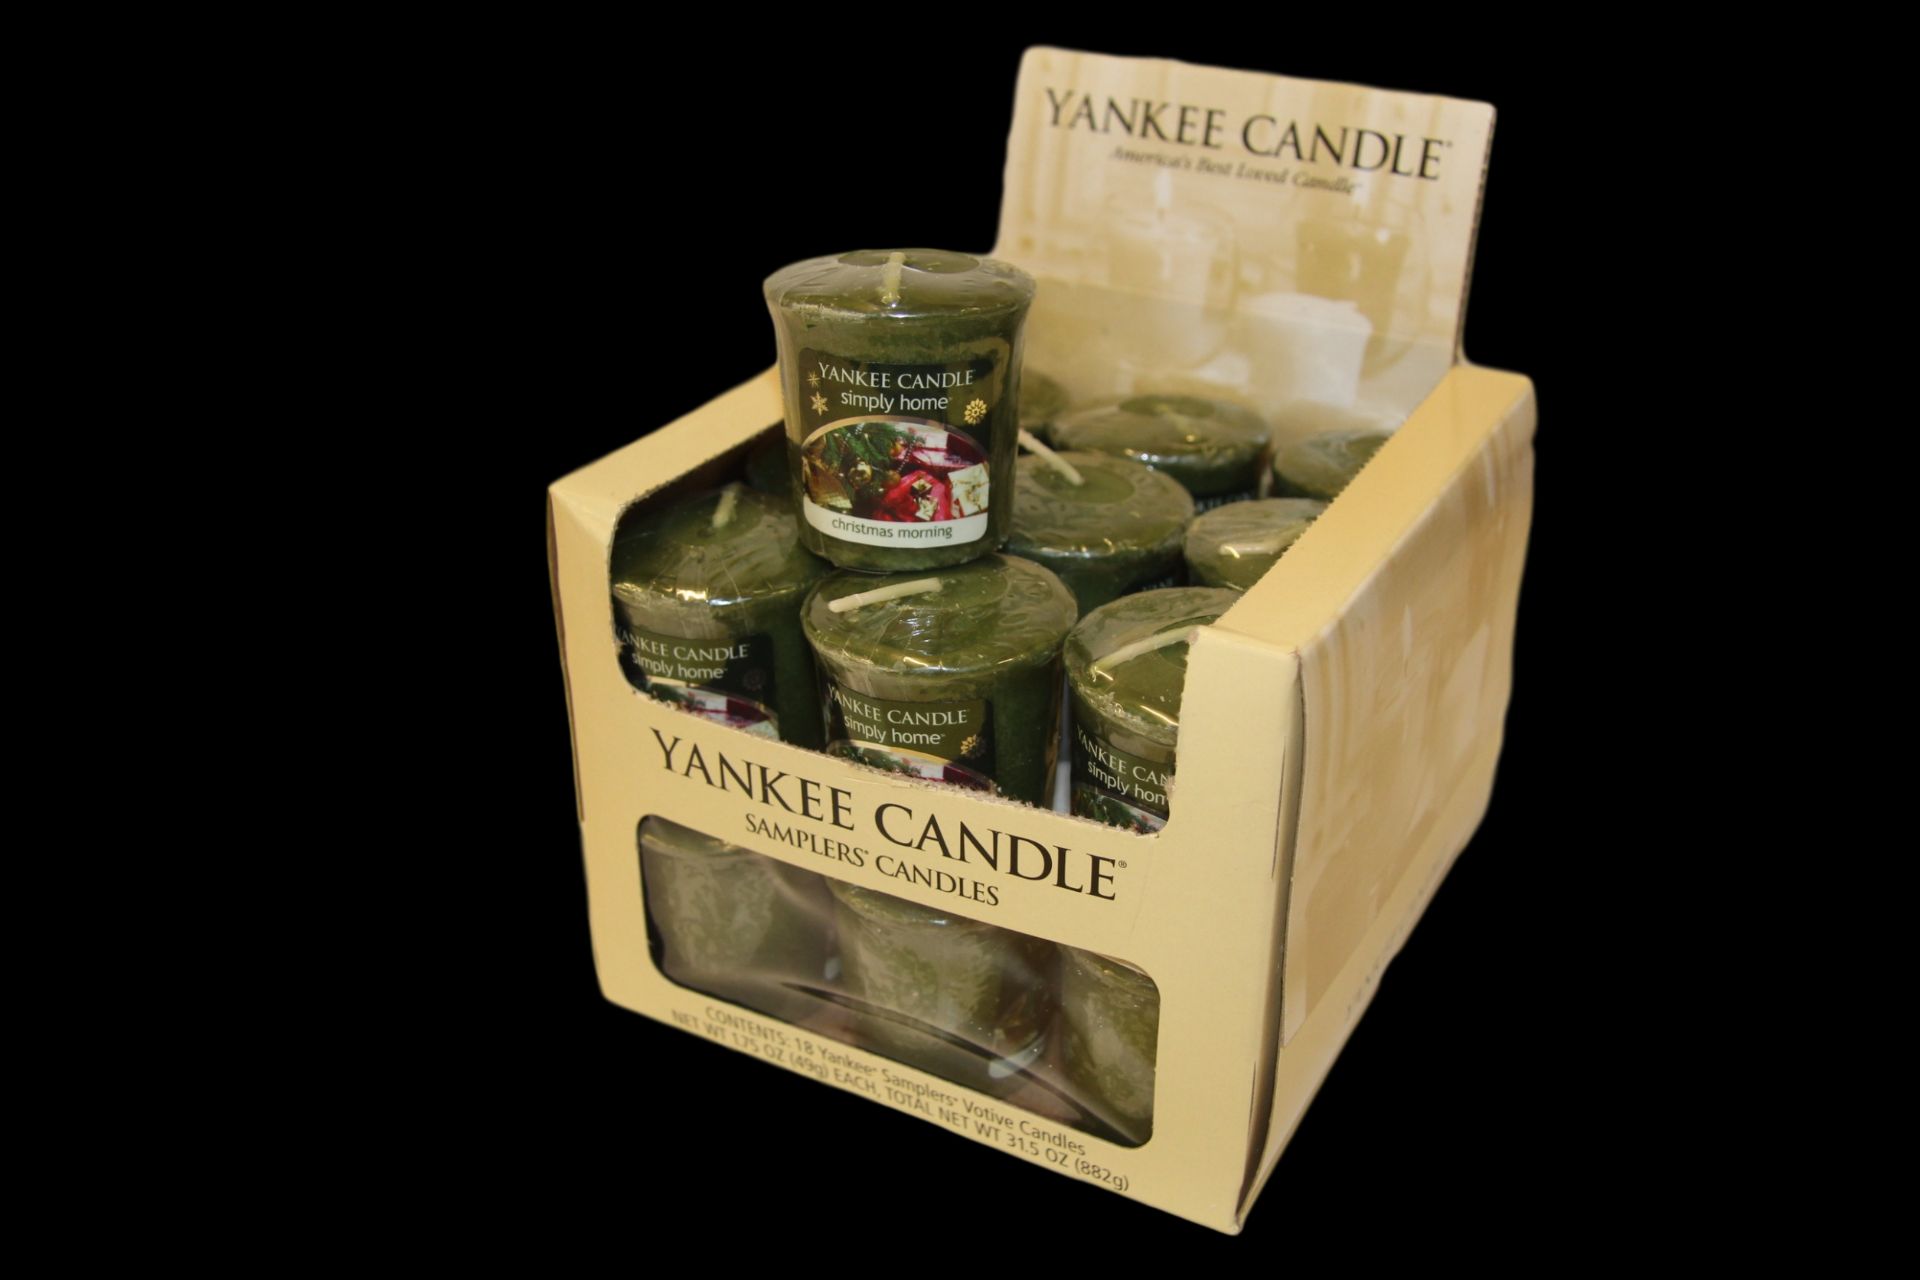 V Brand New 18 x Yankee Candle Christmas Morning 49g eBay Price £19.99 X 2 YOUR BID PRICE TO BE